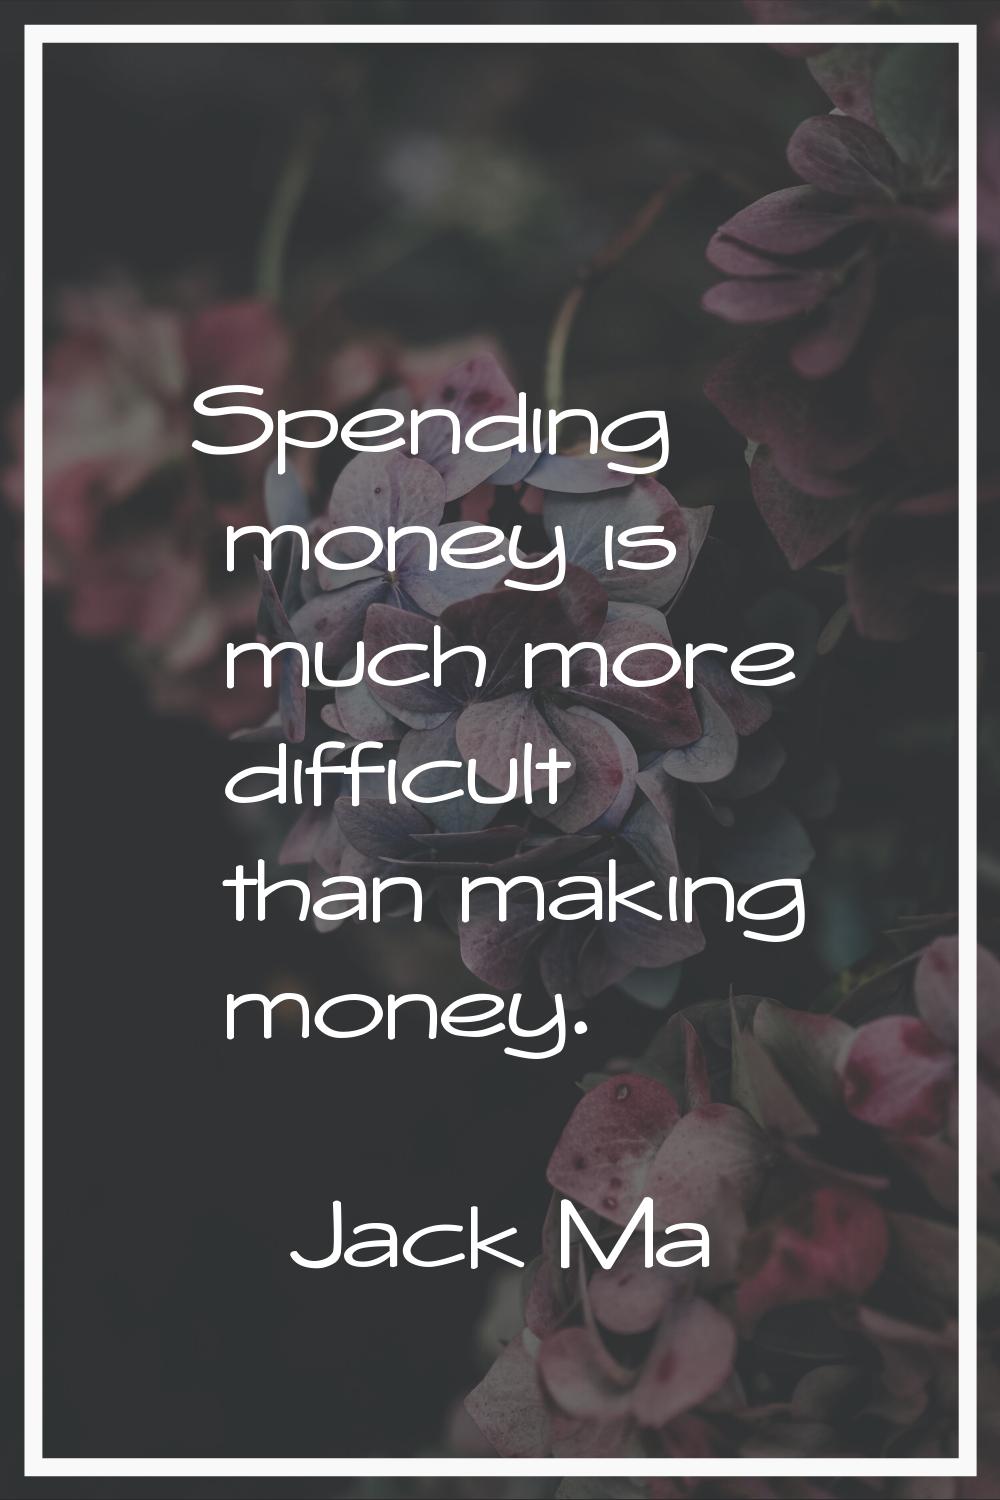 Spending money is much more difficult than making money.